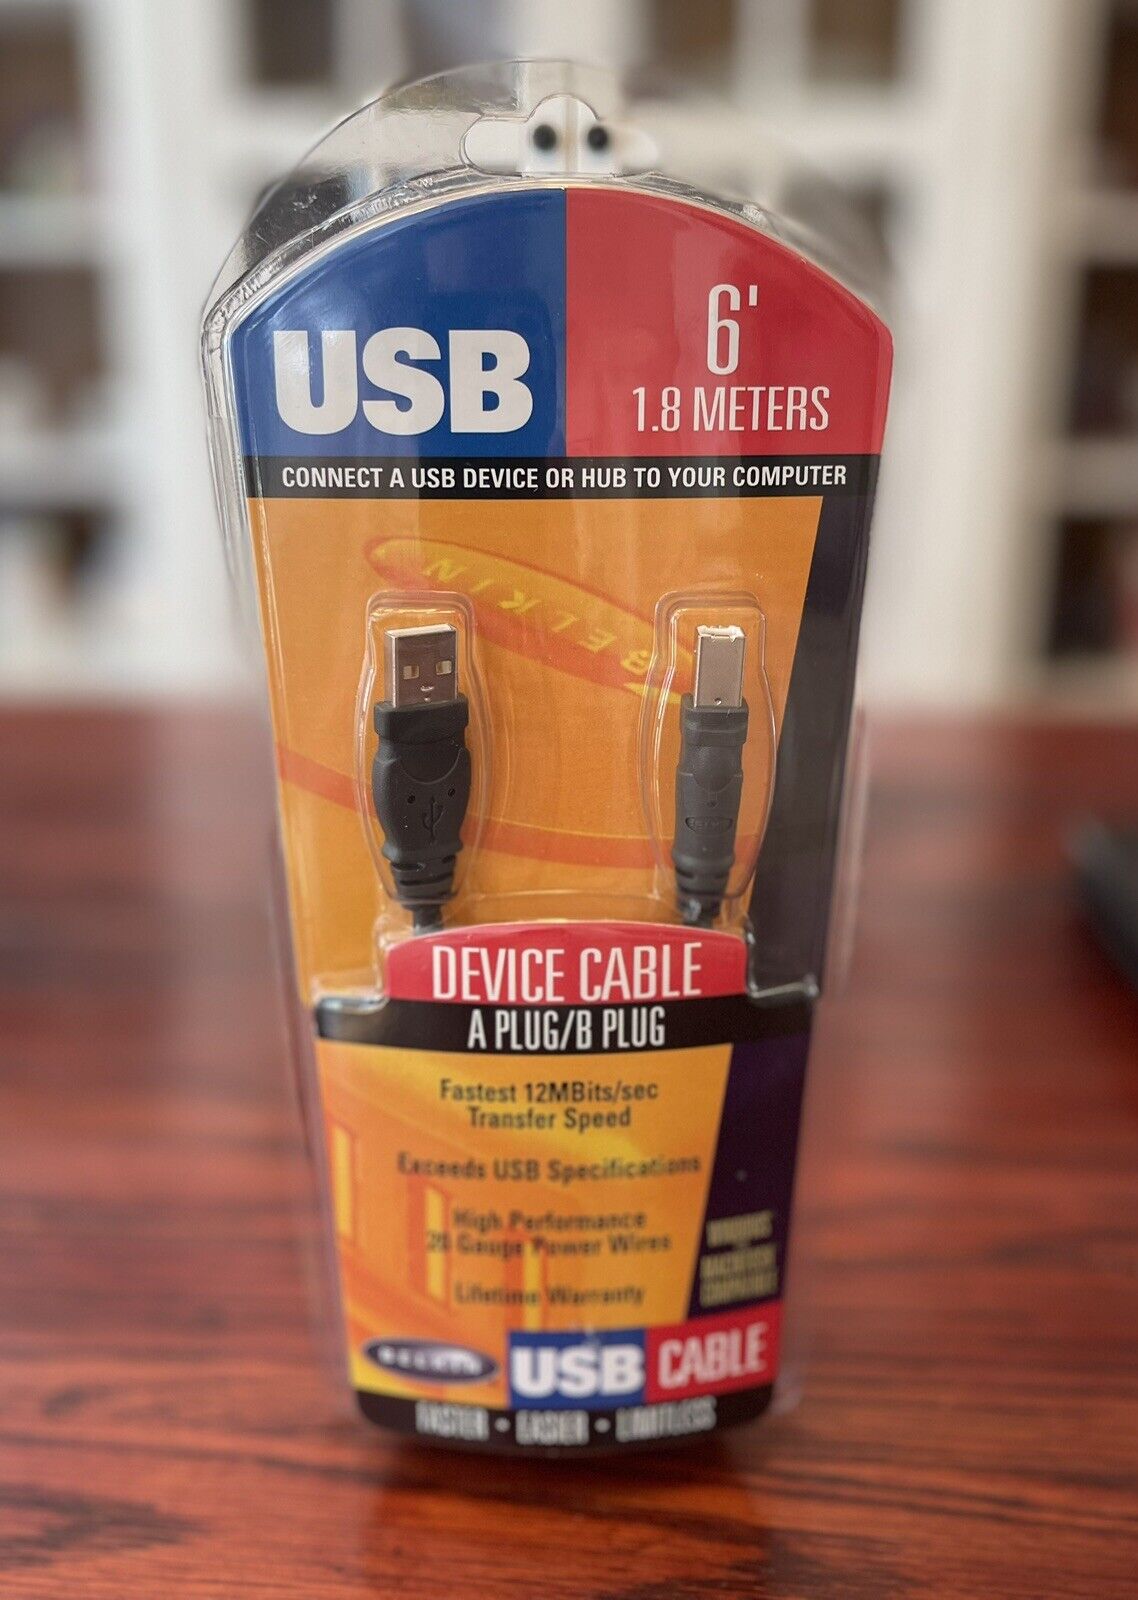 BELKIN Device Cable A Plug/B Plug. USB 6’/1.8 Meters. New In Package.